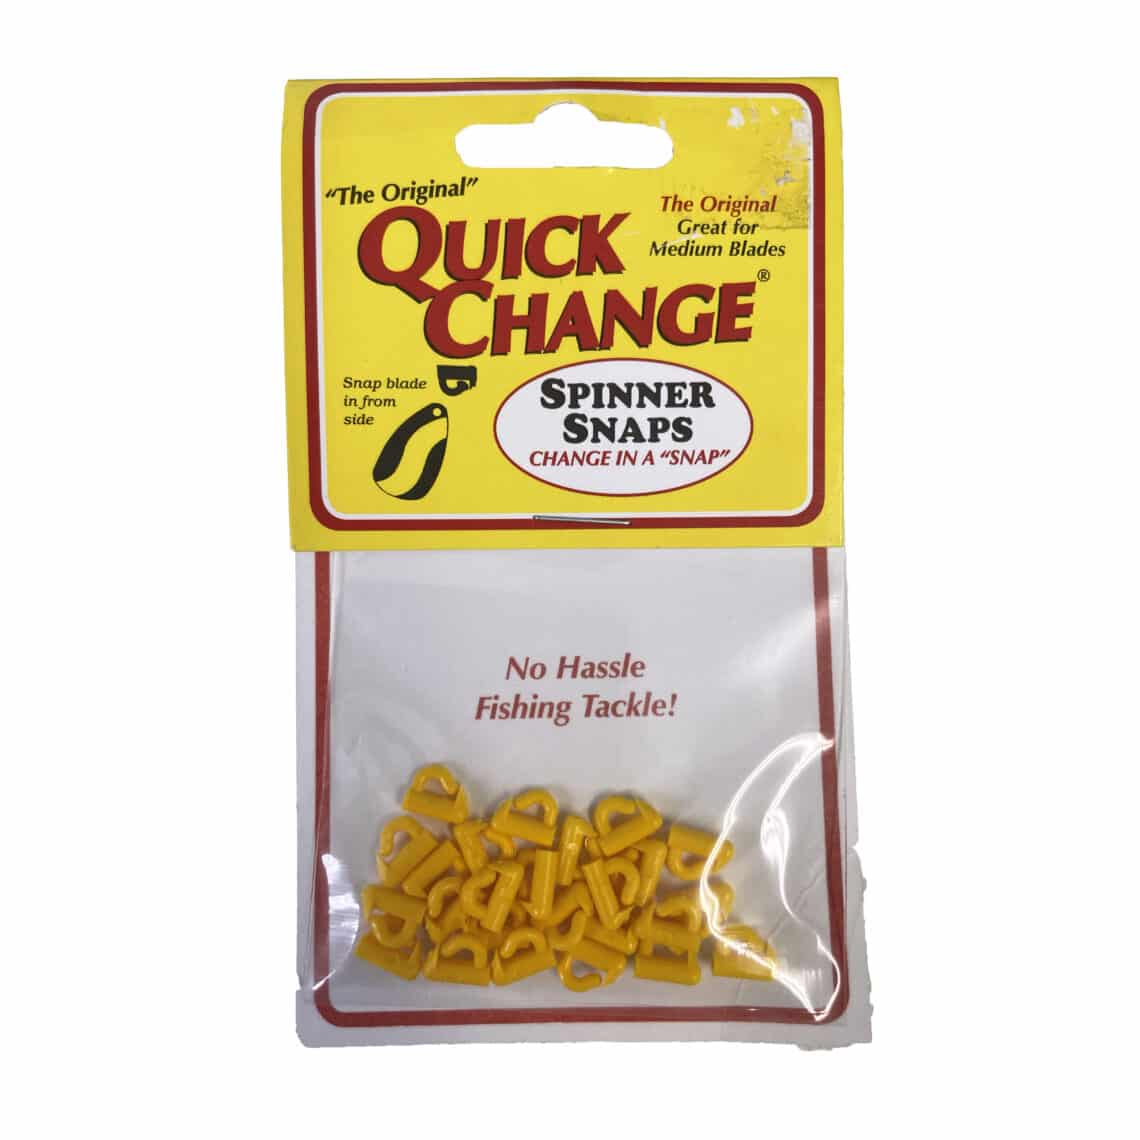 QUICK CHANGE SPINNER SNAPS - Northwoods Wholesale Outlet